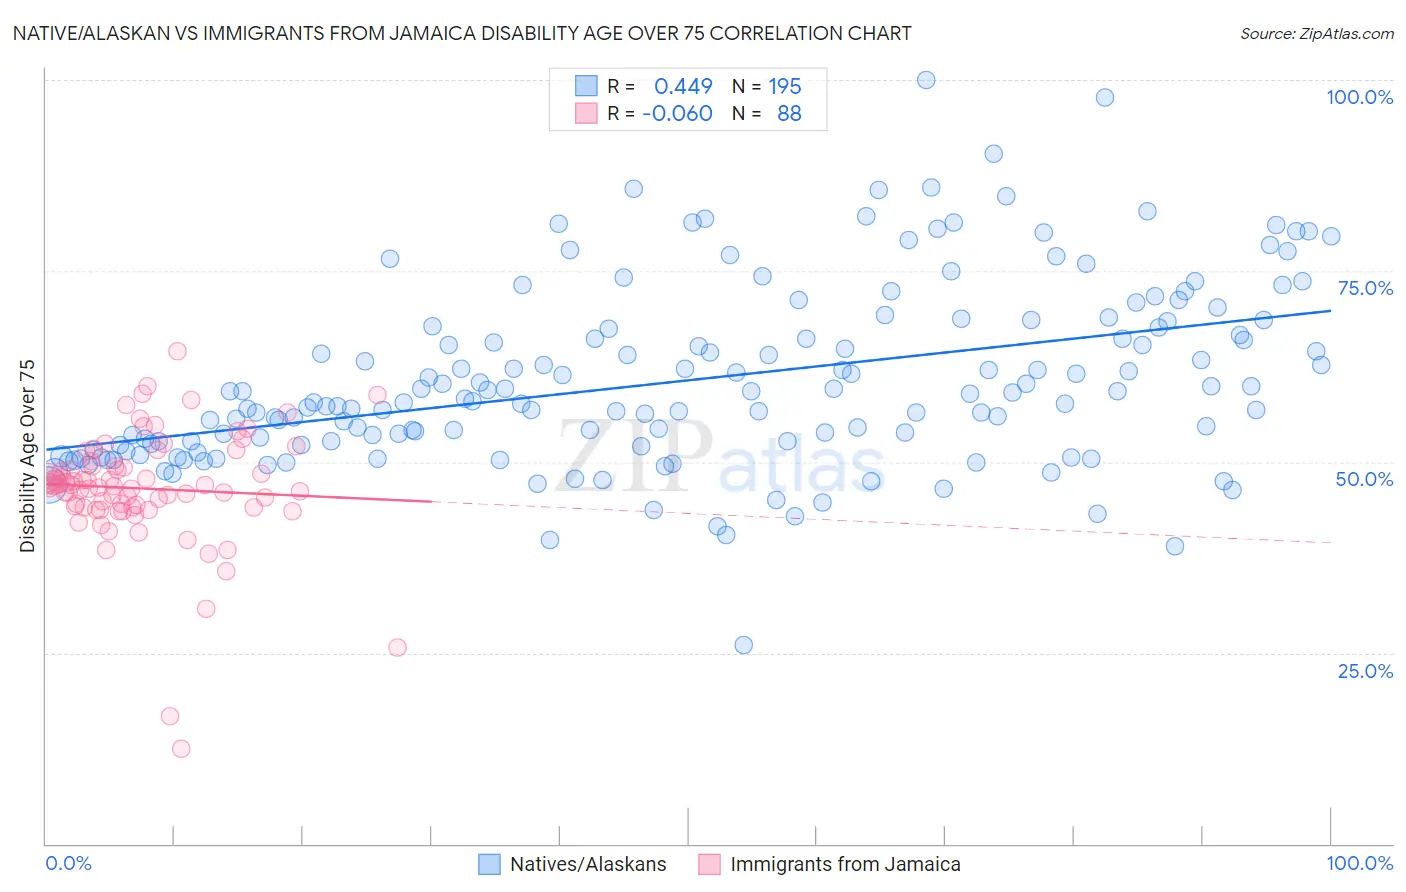 Native/Alaskan vs Immigrants from Jamaica Disability Age Over 75